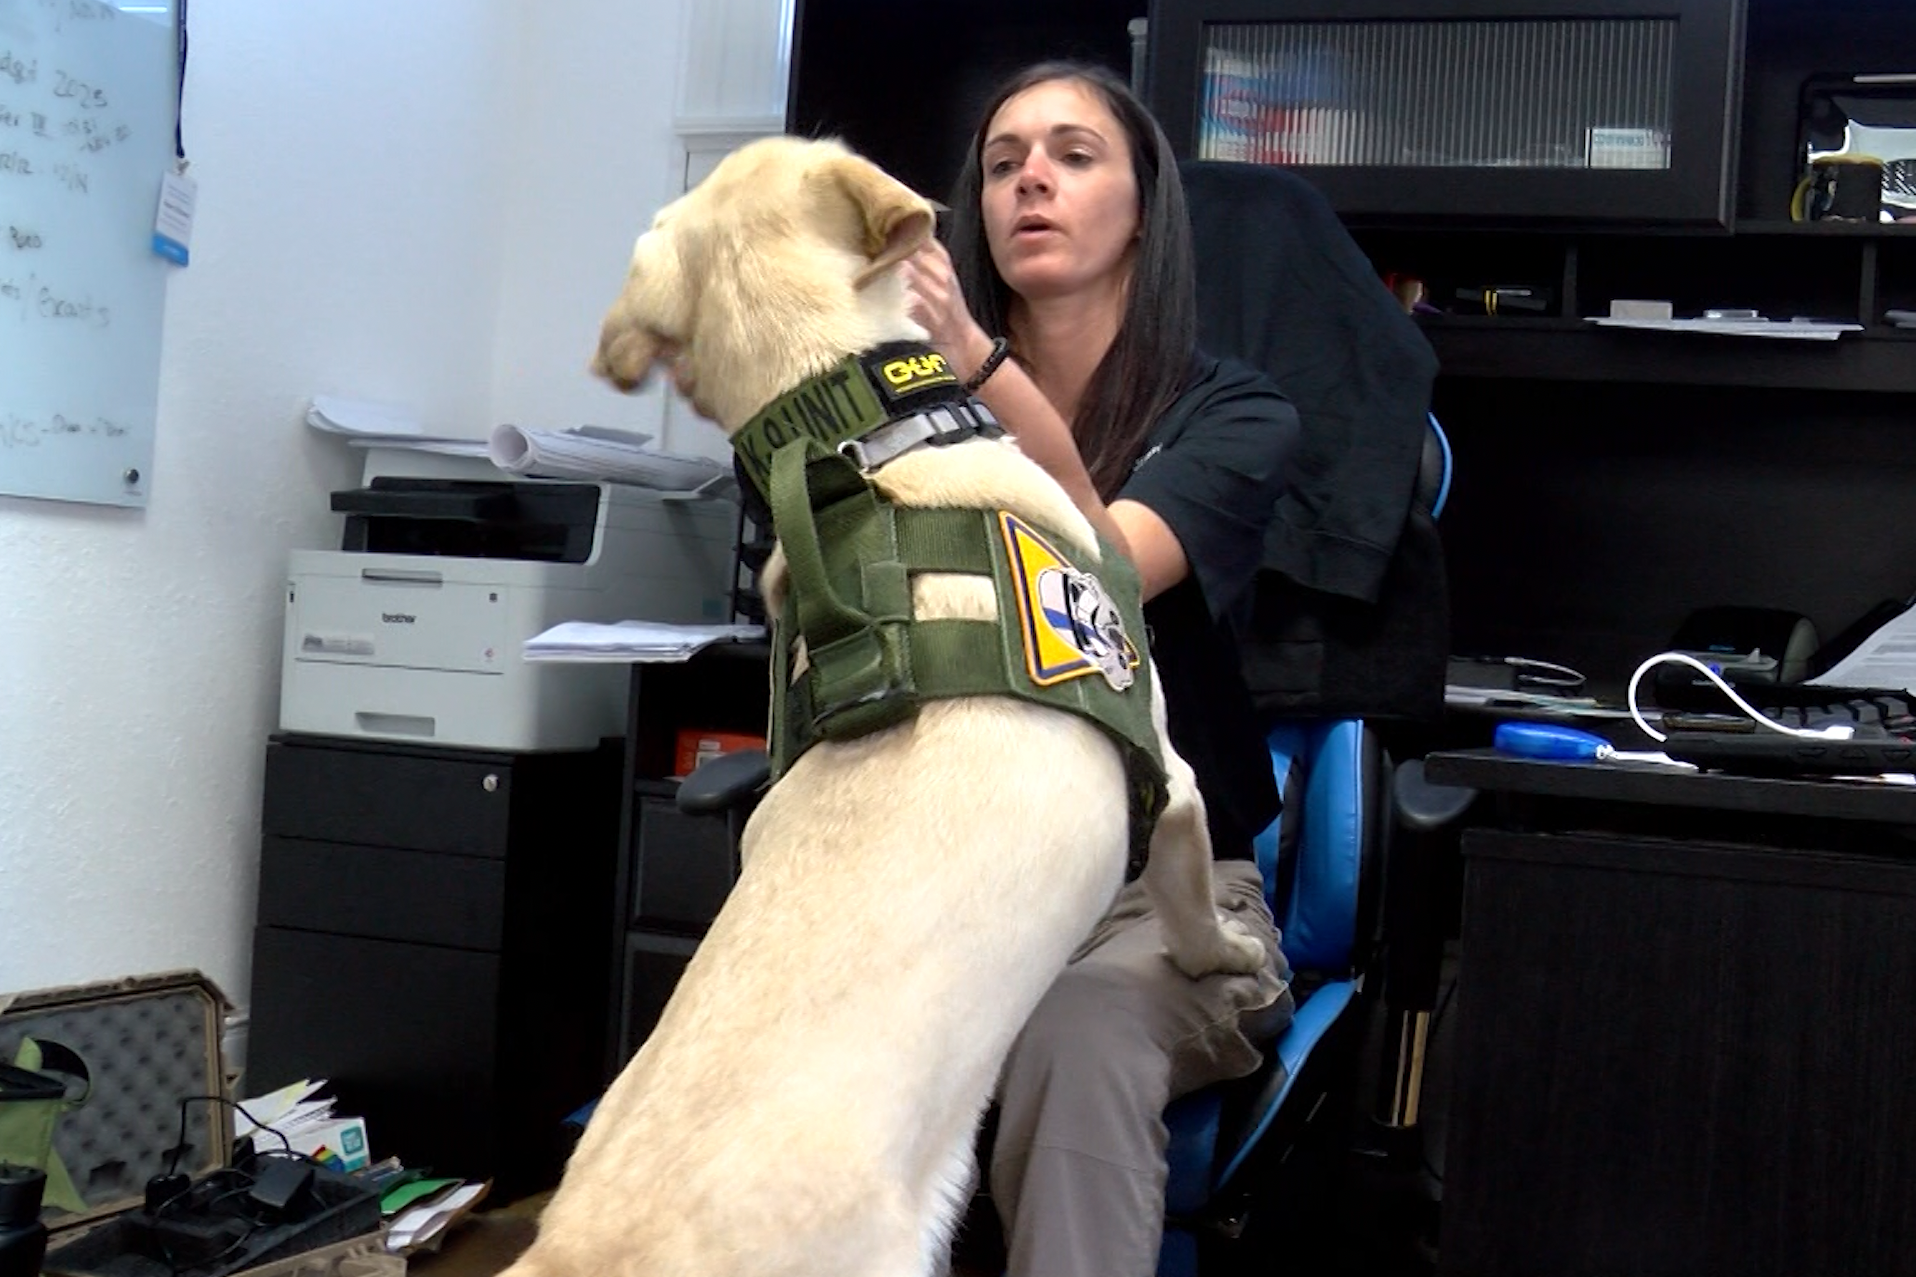 Bogey, a K9 officer, and her handler, Karen O'Connor, of the Knox County High Tech Crime Unit